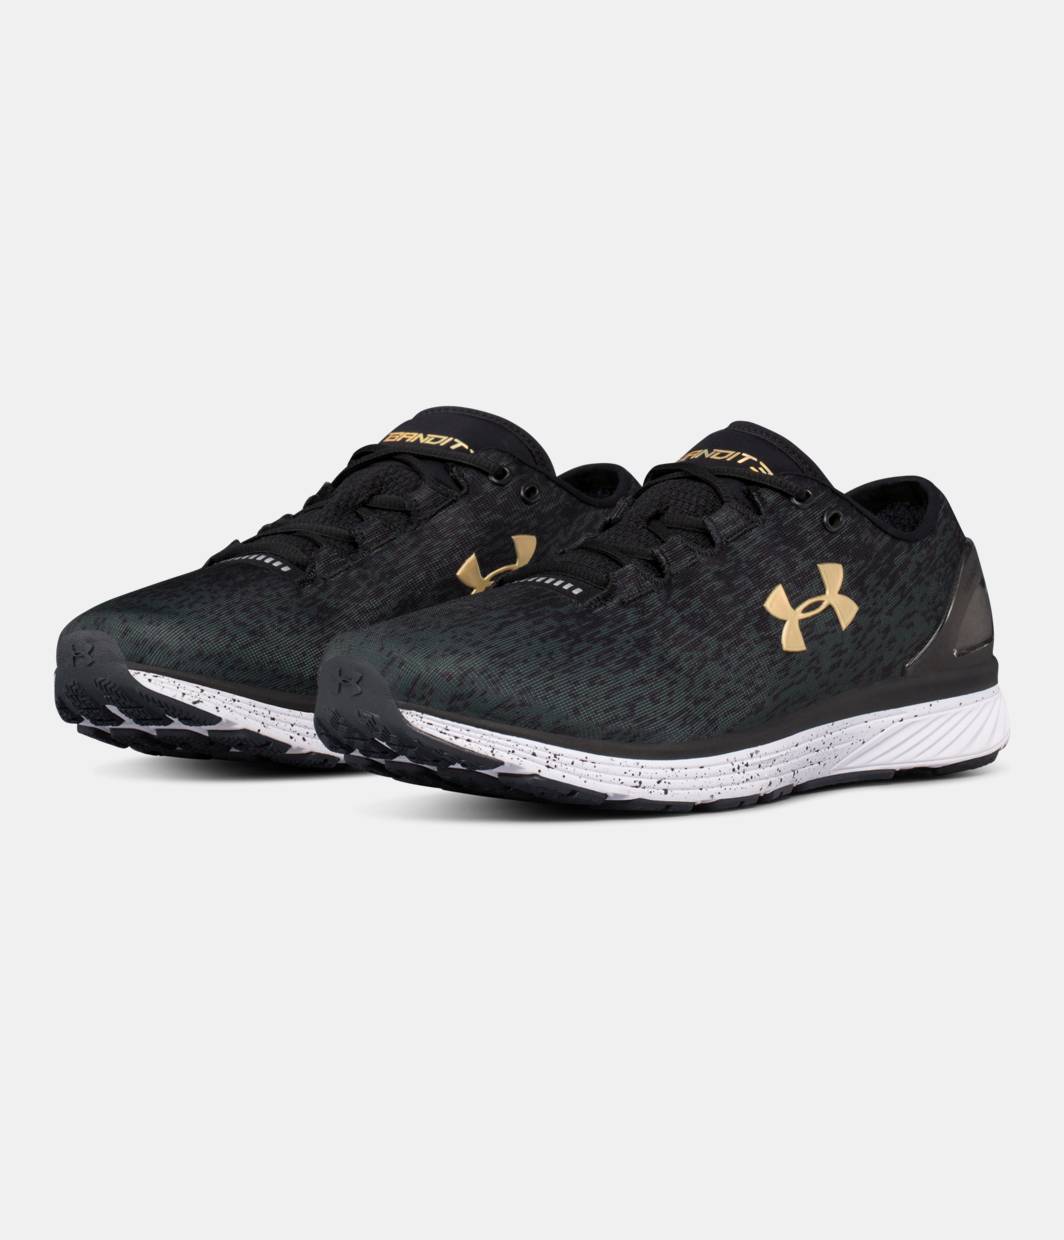 Stevenson Socialismo Querer Shoes | Under armour Charged Bandit 3 Ombre | Fitness